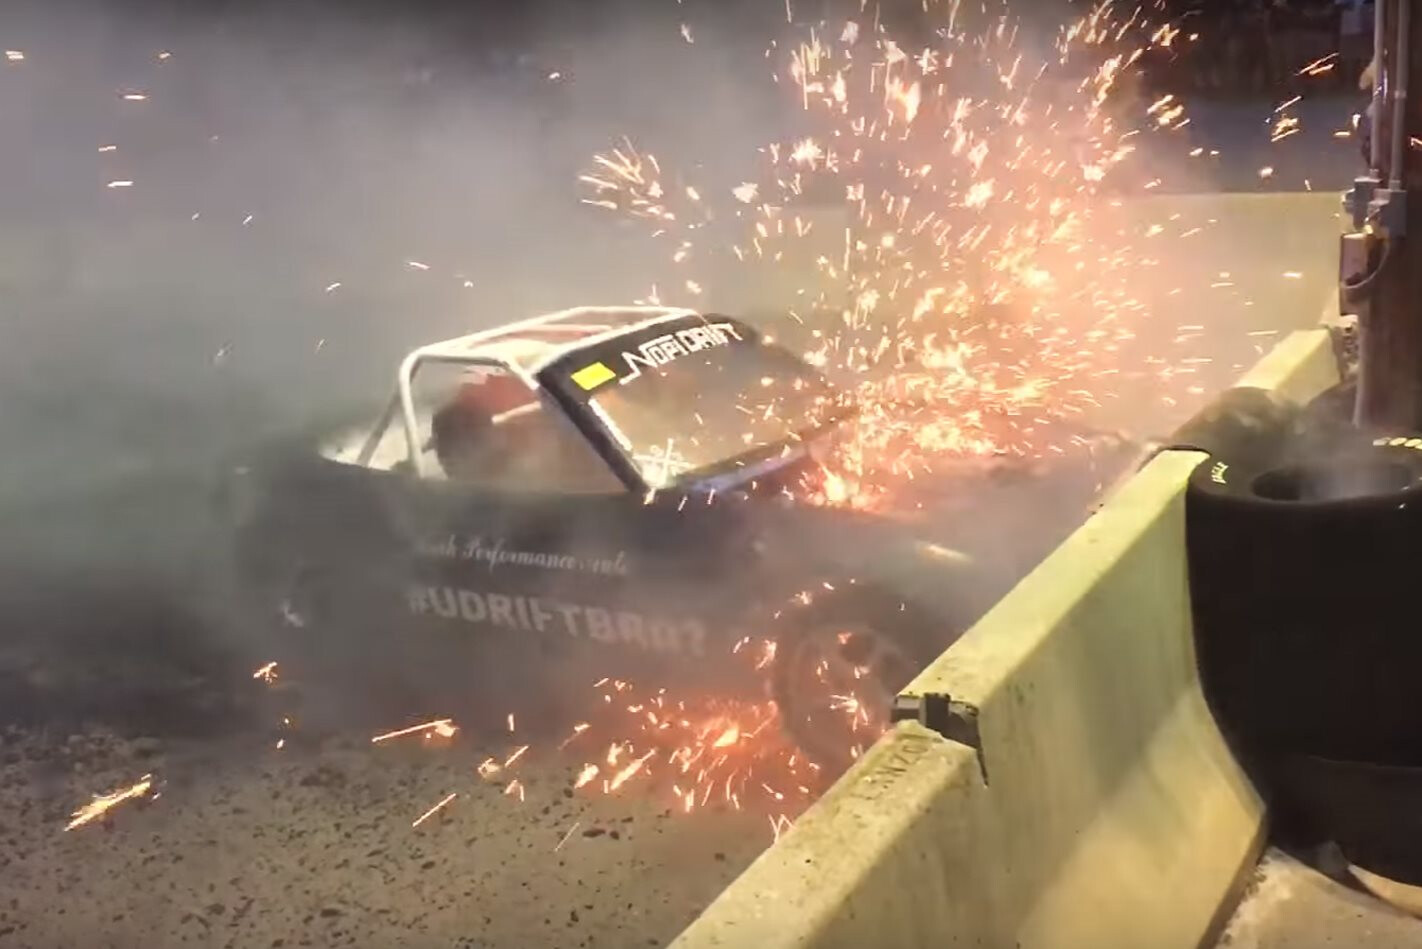 V8-SWAPPED MAZDA MX-5 EXPLODES AT AMERICAN BURNOUT COMP – VIDEO